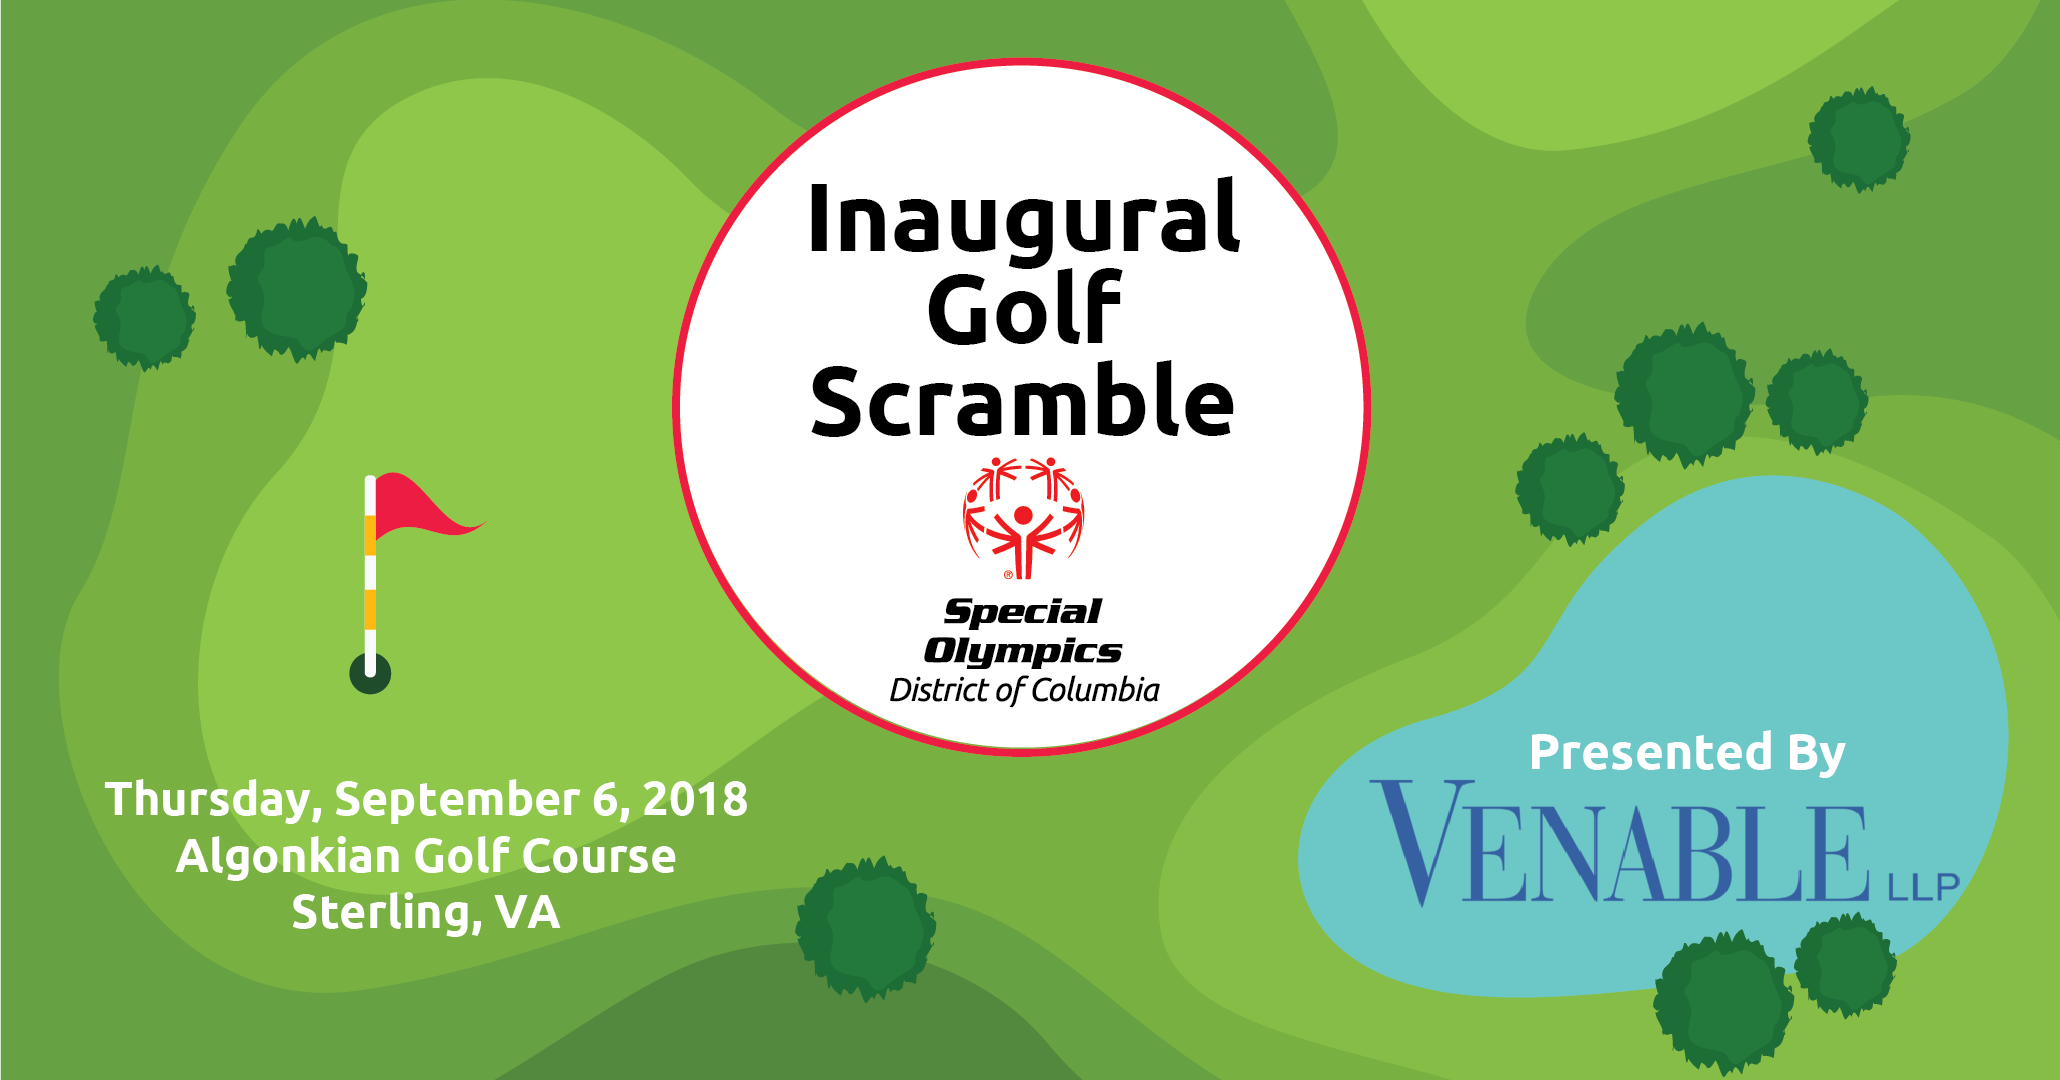 Inaugural Special Olympics DC Golf Scramble Presented by Venable LLC